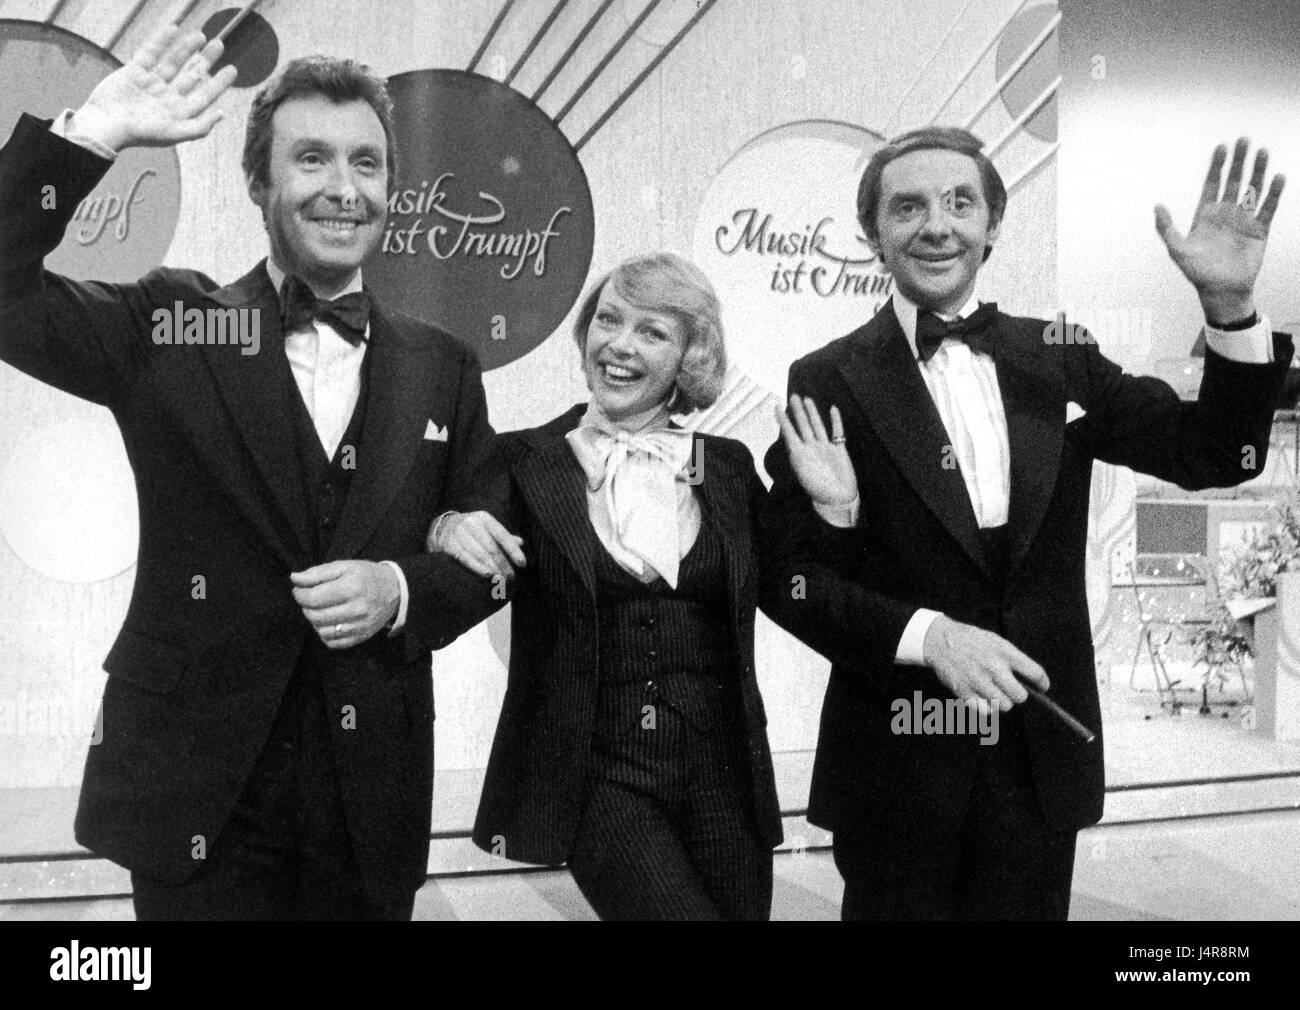 ARCHIVE - The Austrian entertainer Peter Alexander (L) is the guest star as the famous hsow 'Musik is Trumpf' which aired for the opening of the International Congress Centre (ICC) in Berlin, Germany, 31 March 1970. The actors Barbara Schoene (M) and Harald Juhnke joined in the show. Photo: Klar/dpa Stock Photo